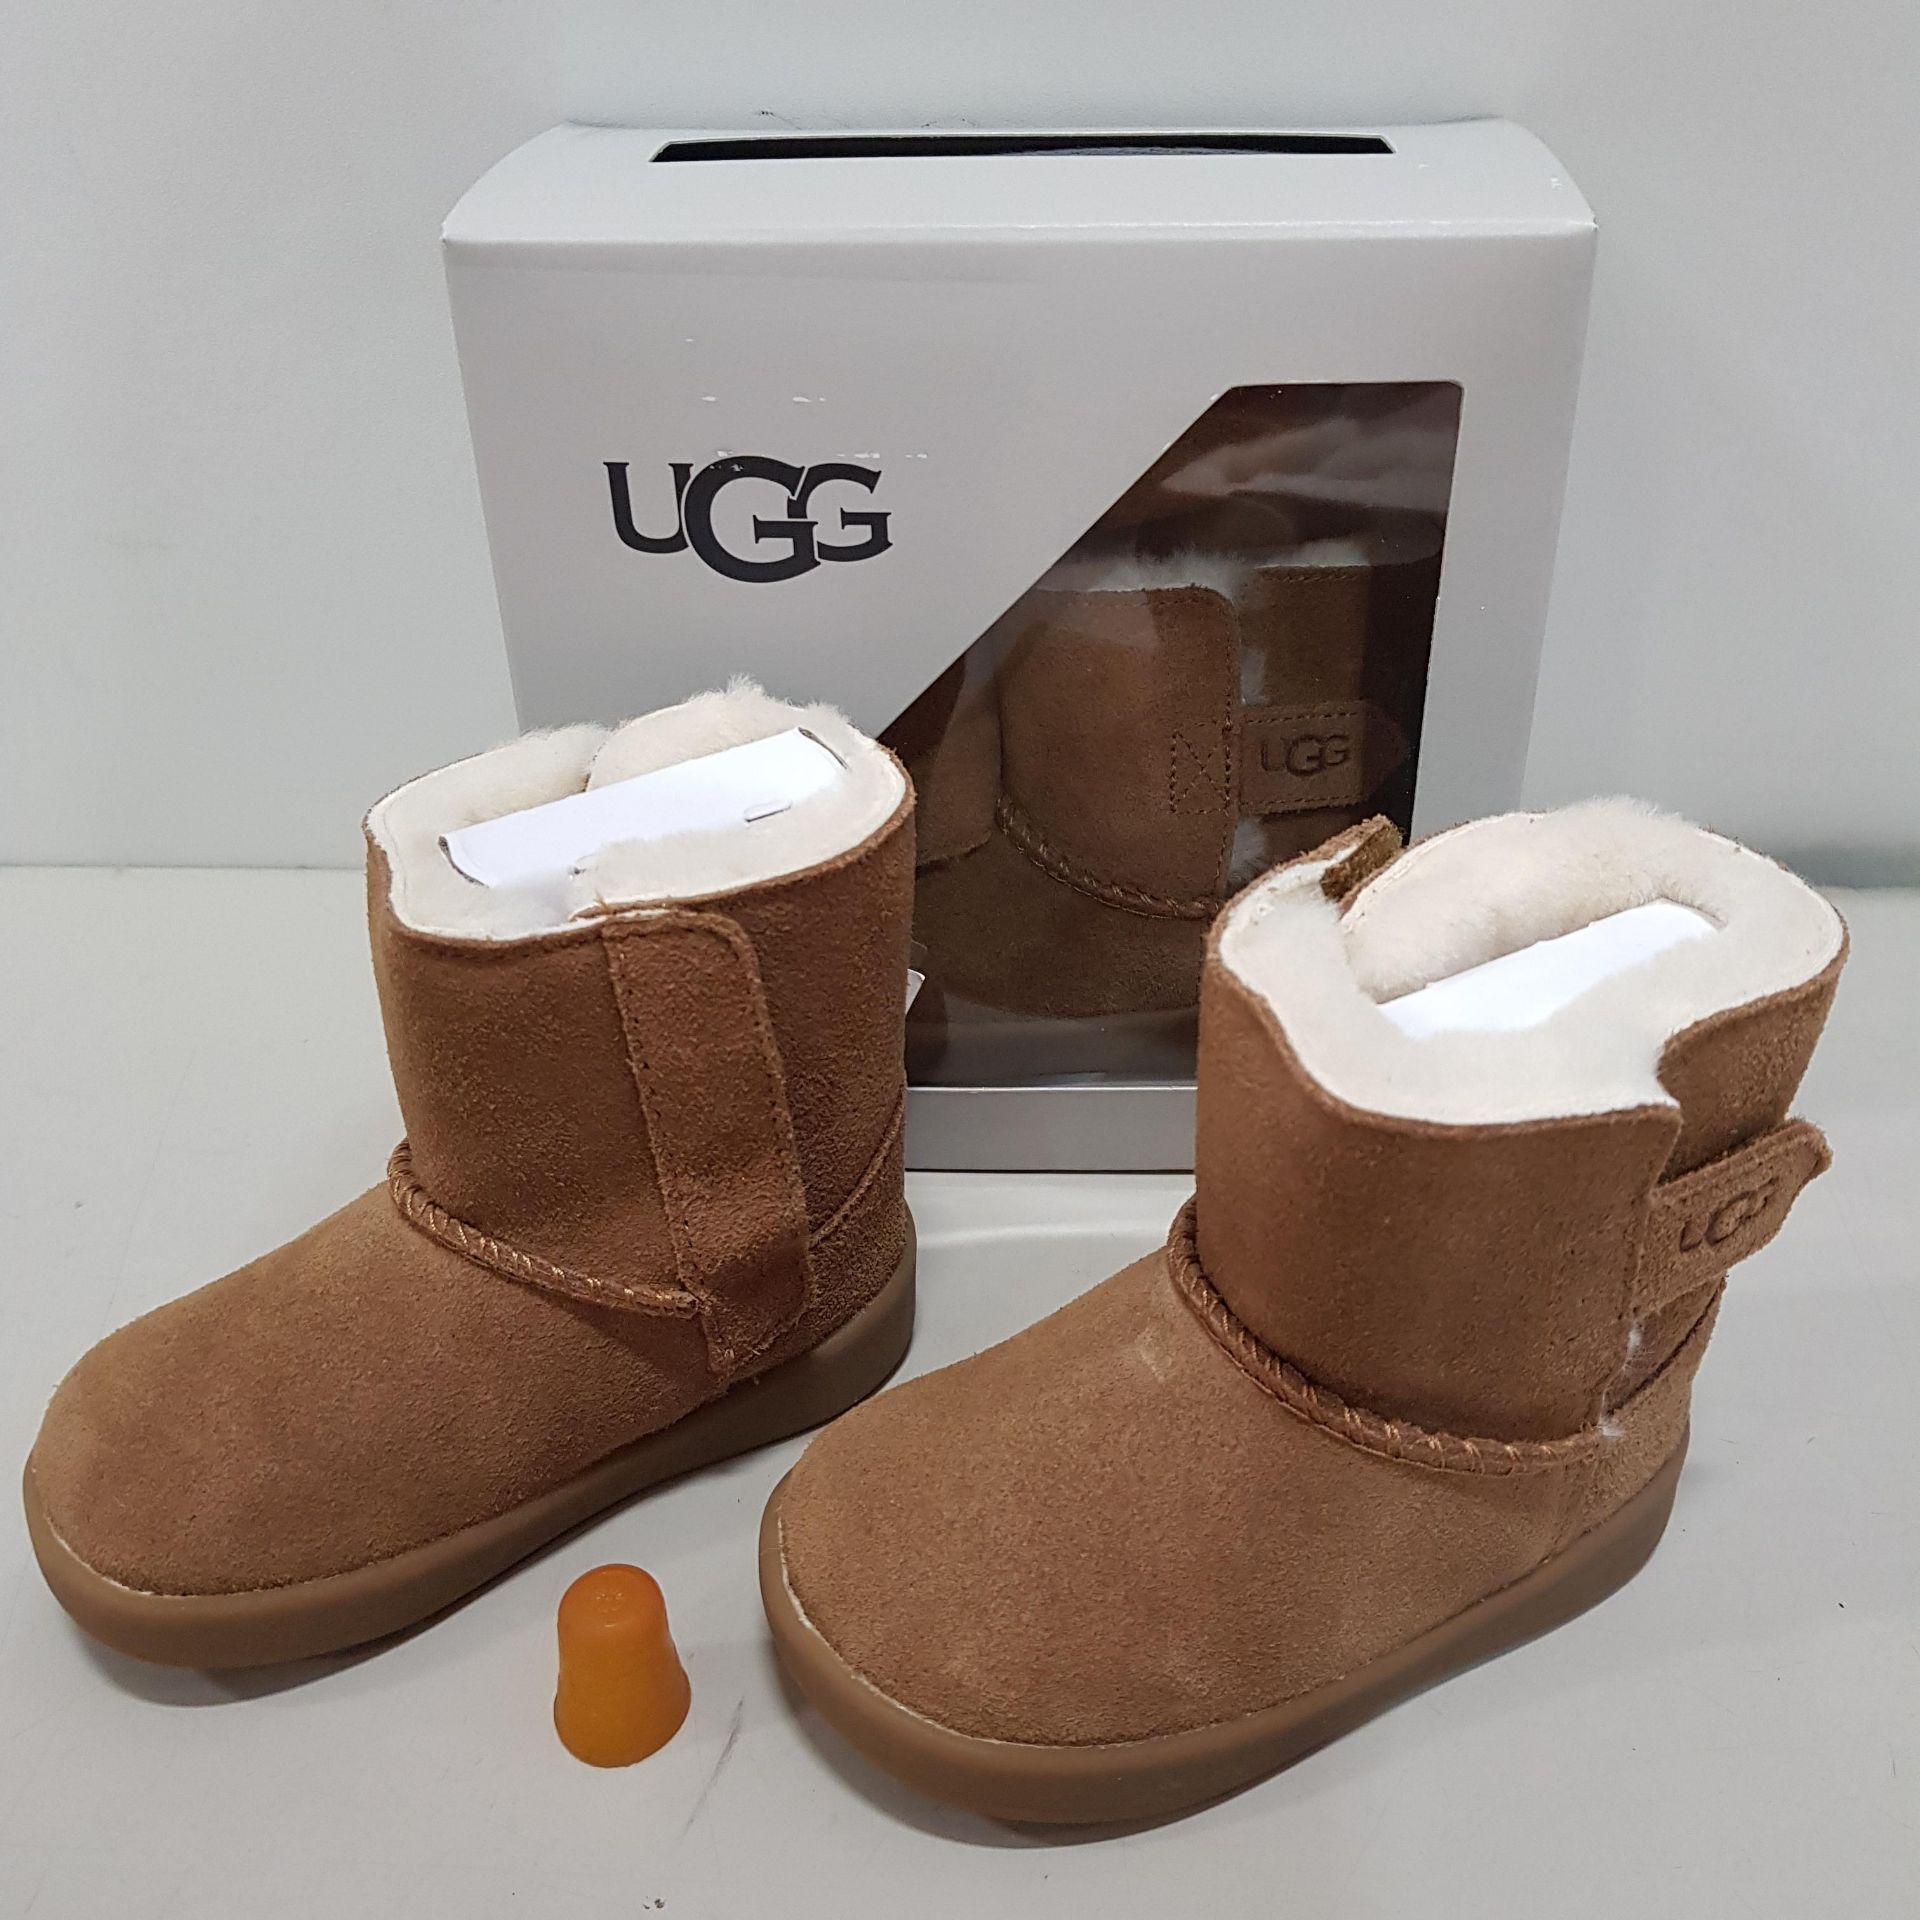 12 X BRAND NEW BOXED BABY FAUX FUR KEELAN UGG BOOTS IN BROWN - ALL IN SIZE BABYS 12- 18 MONTHS ( 4 )